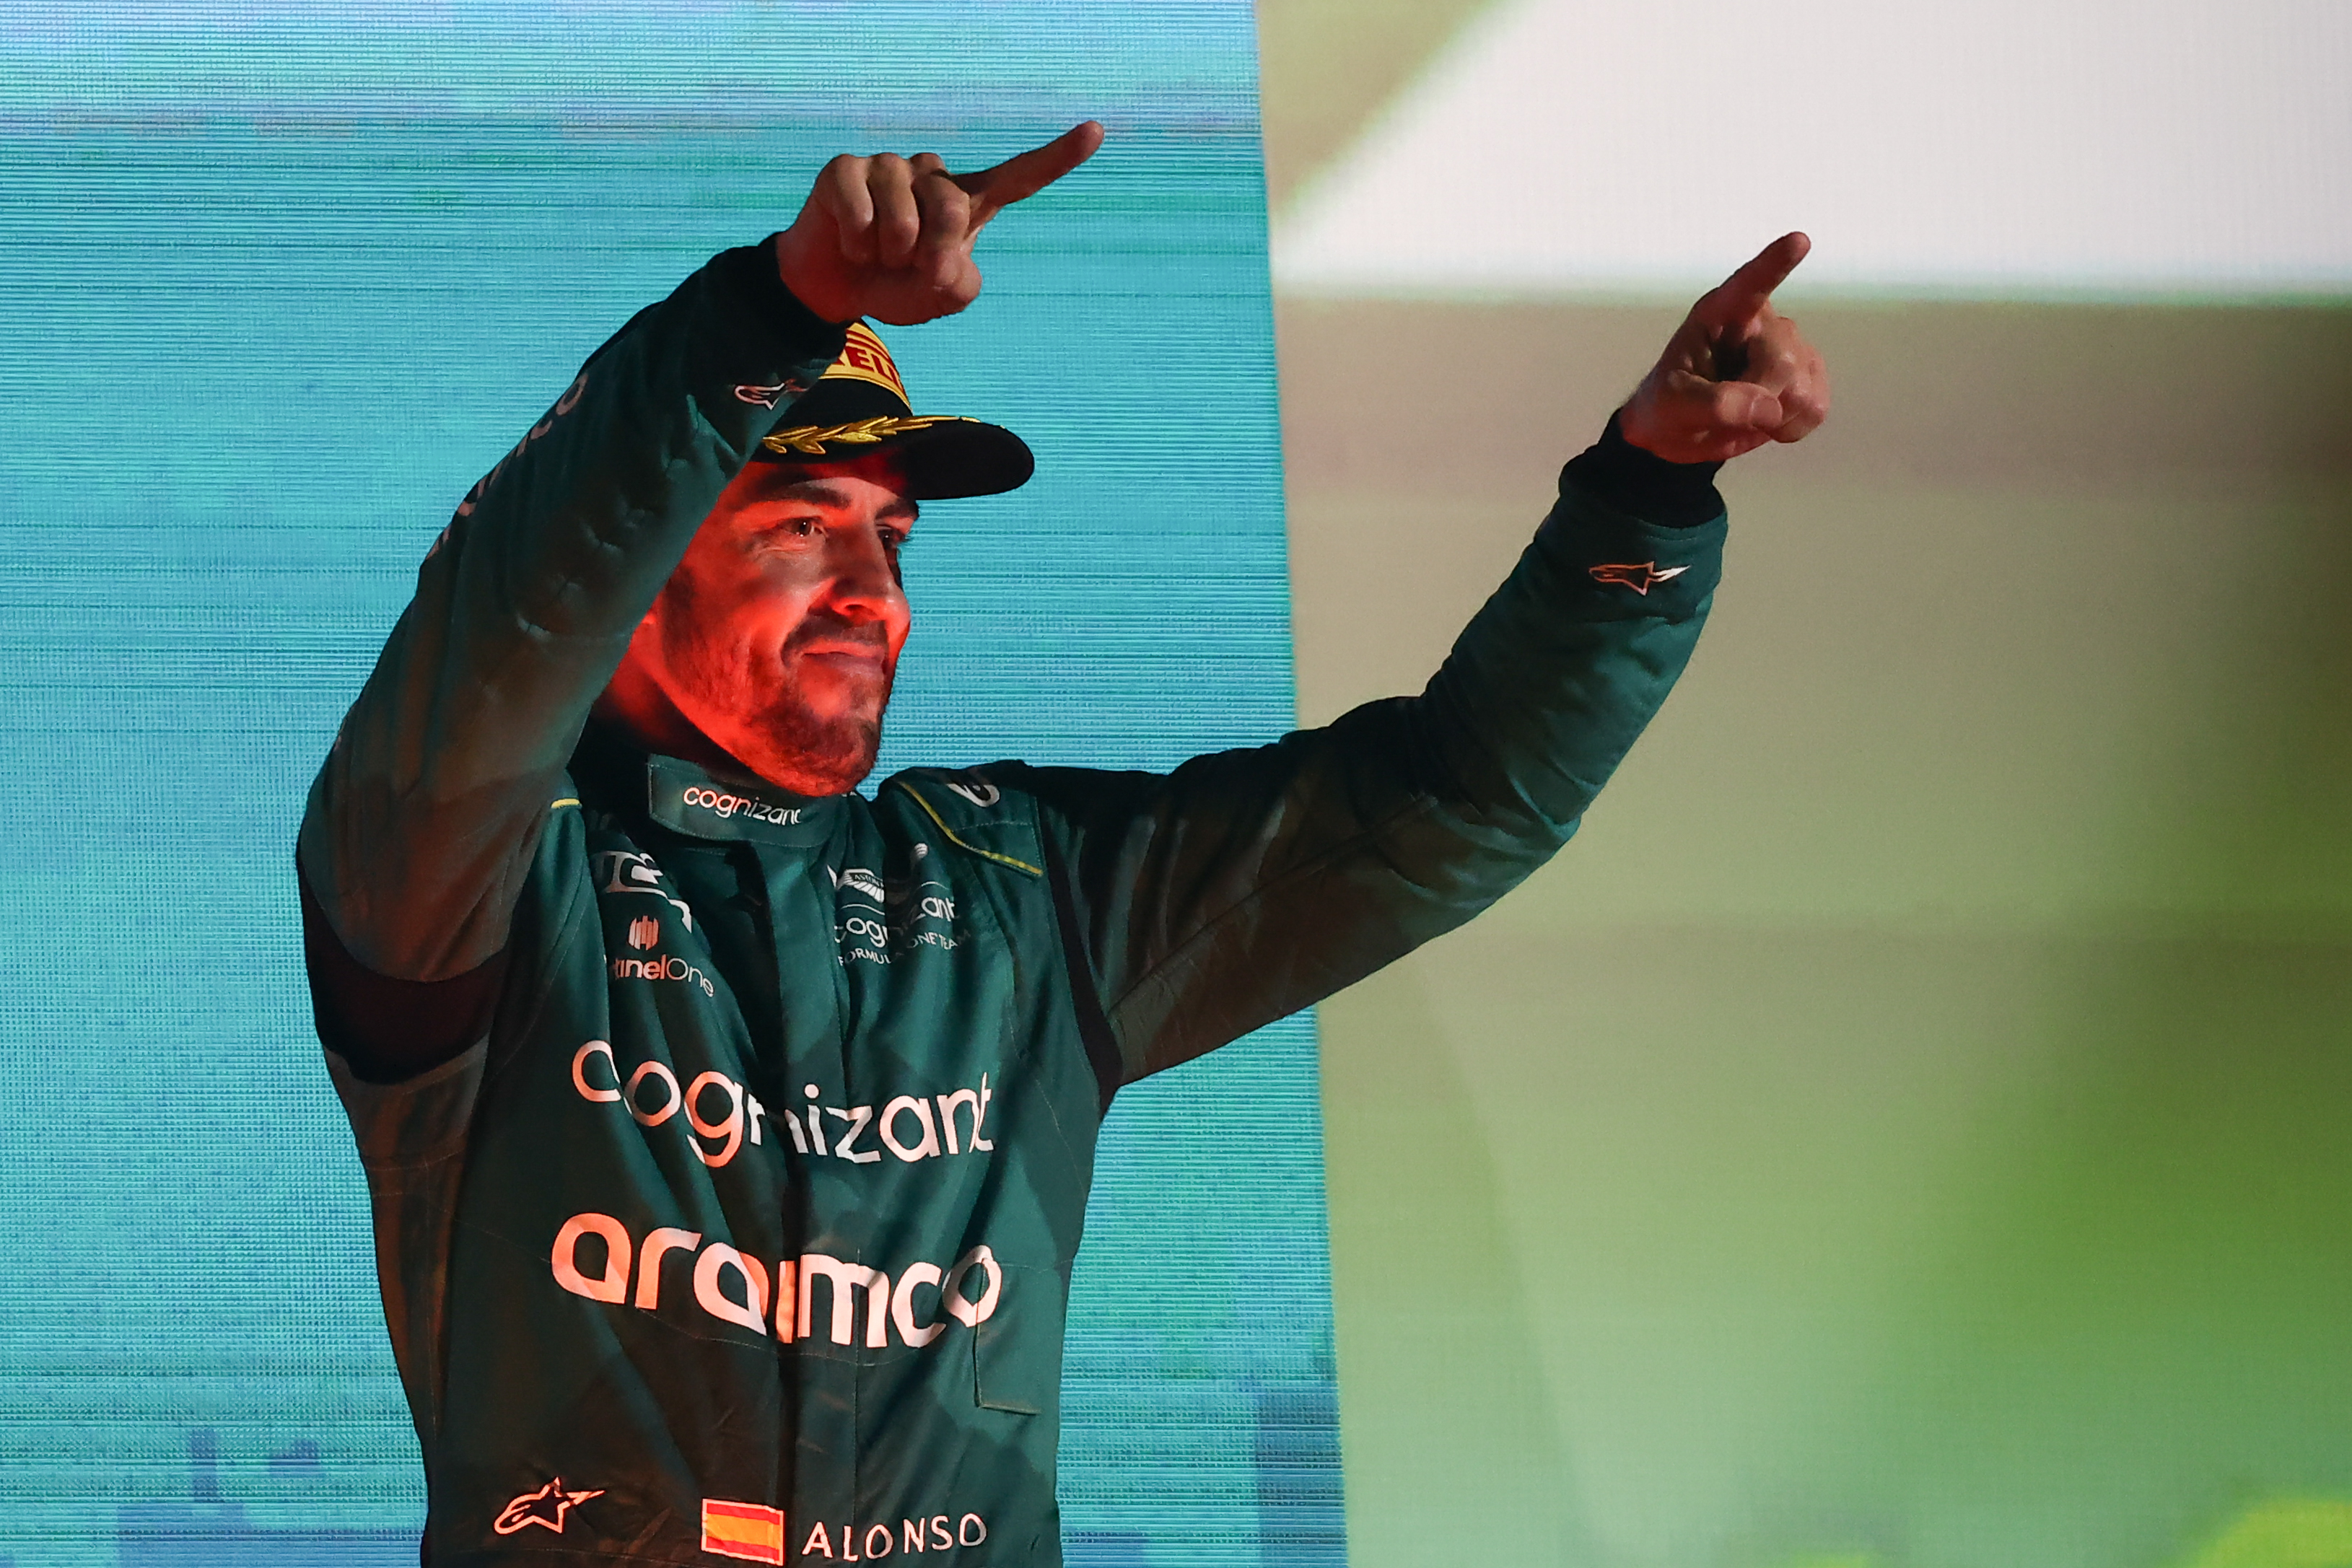 Alonso dedicates his third place in Bahrain to the entire Aston Martin team.